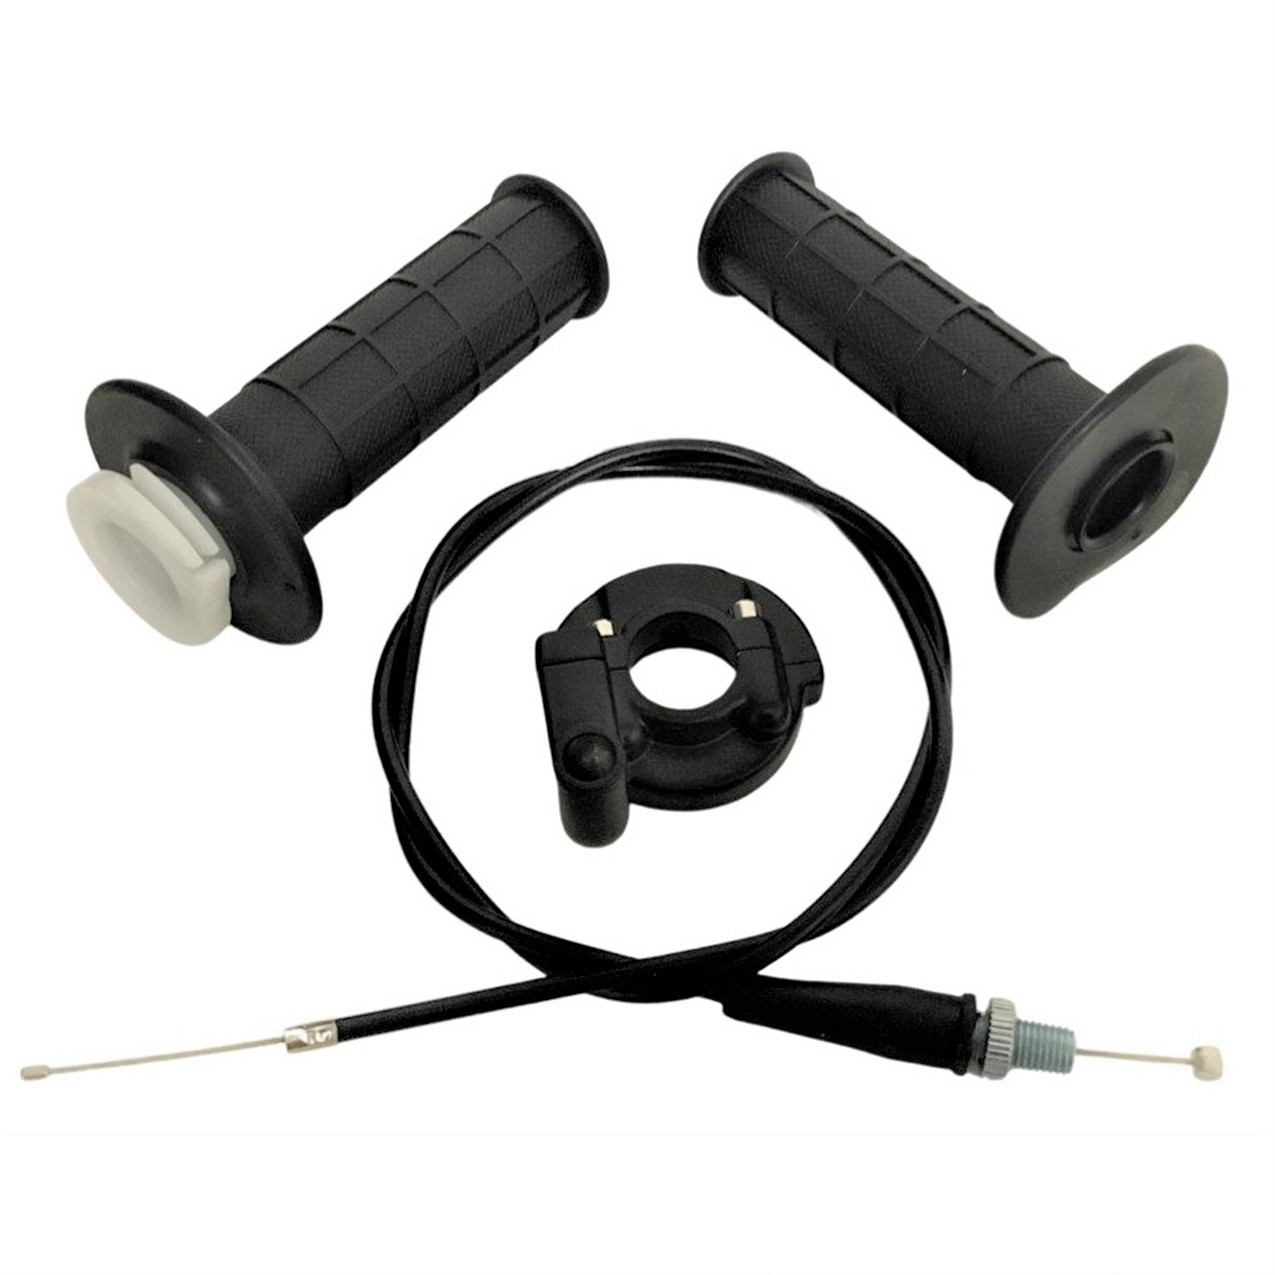 Throttle Assembly Kit Comes with Throttle Tube, Housing, and Cable 34.5/39.25in - Click Image to Close